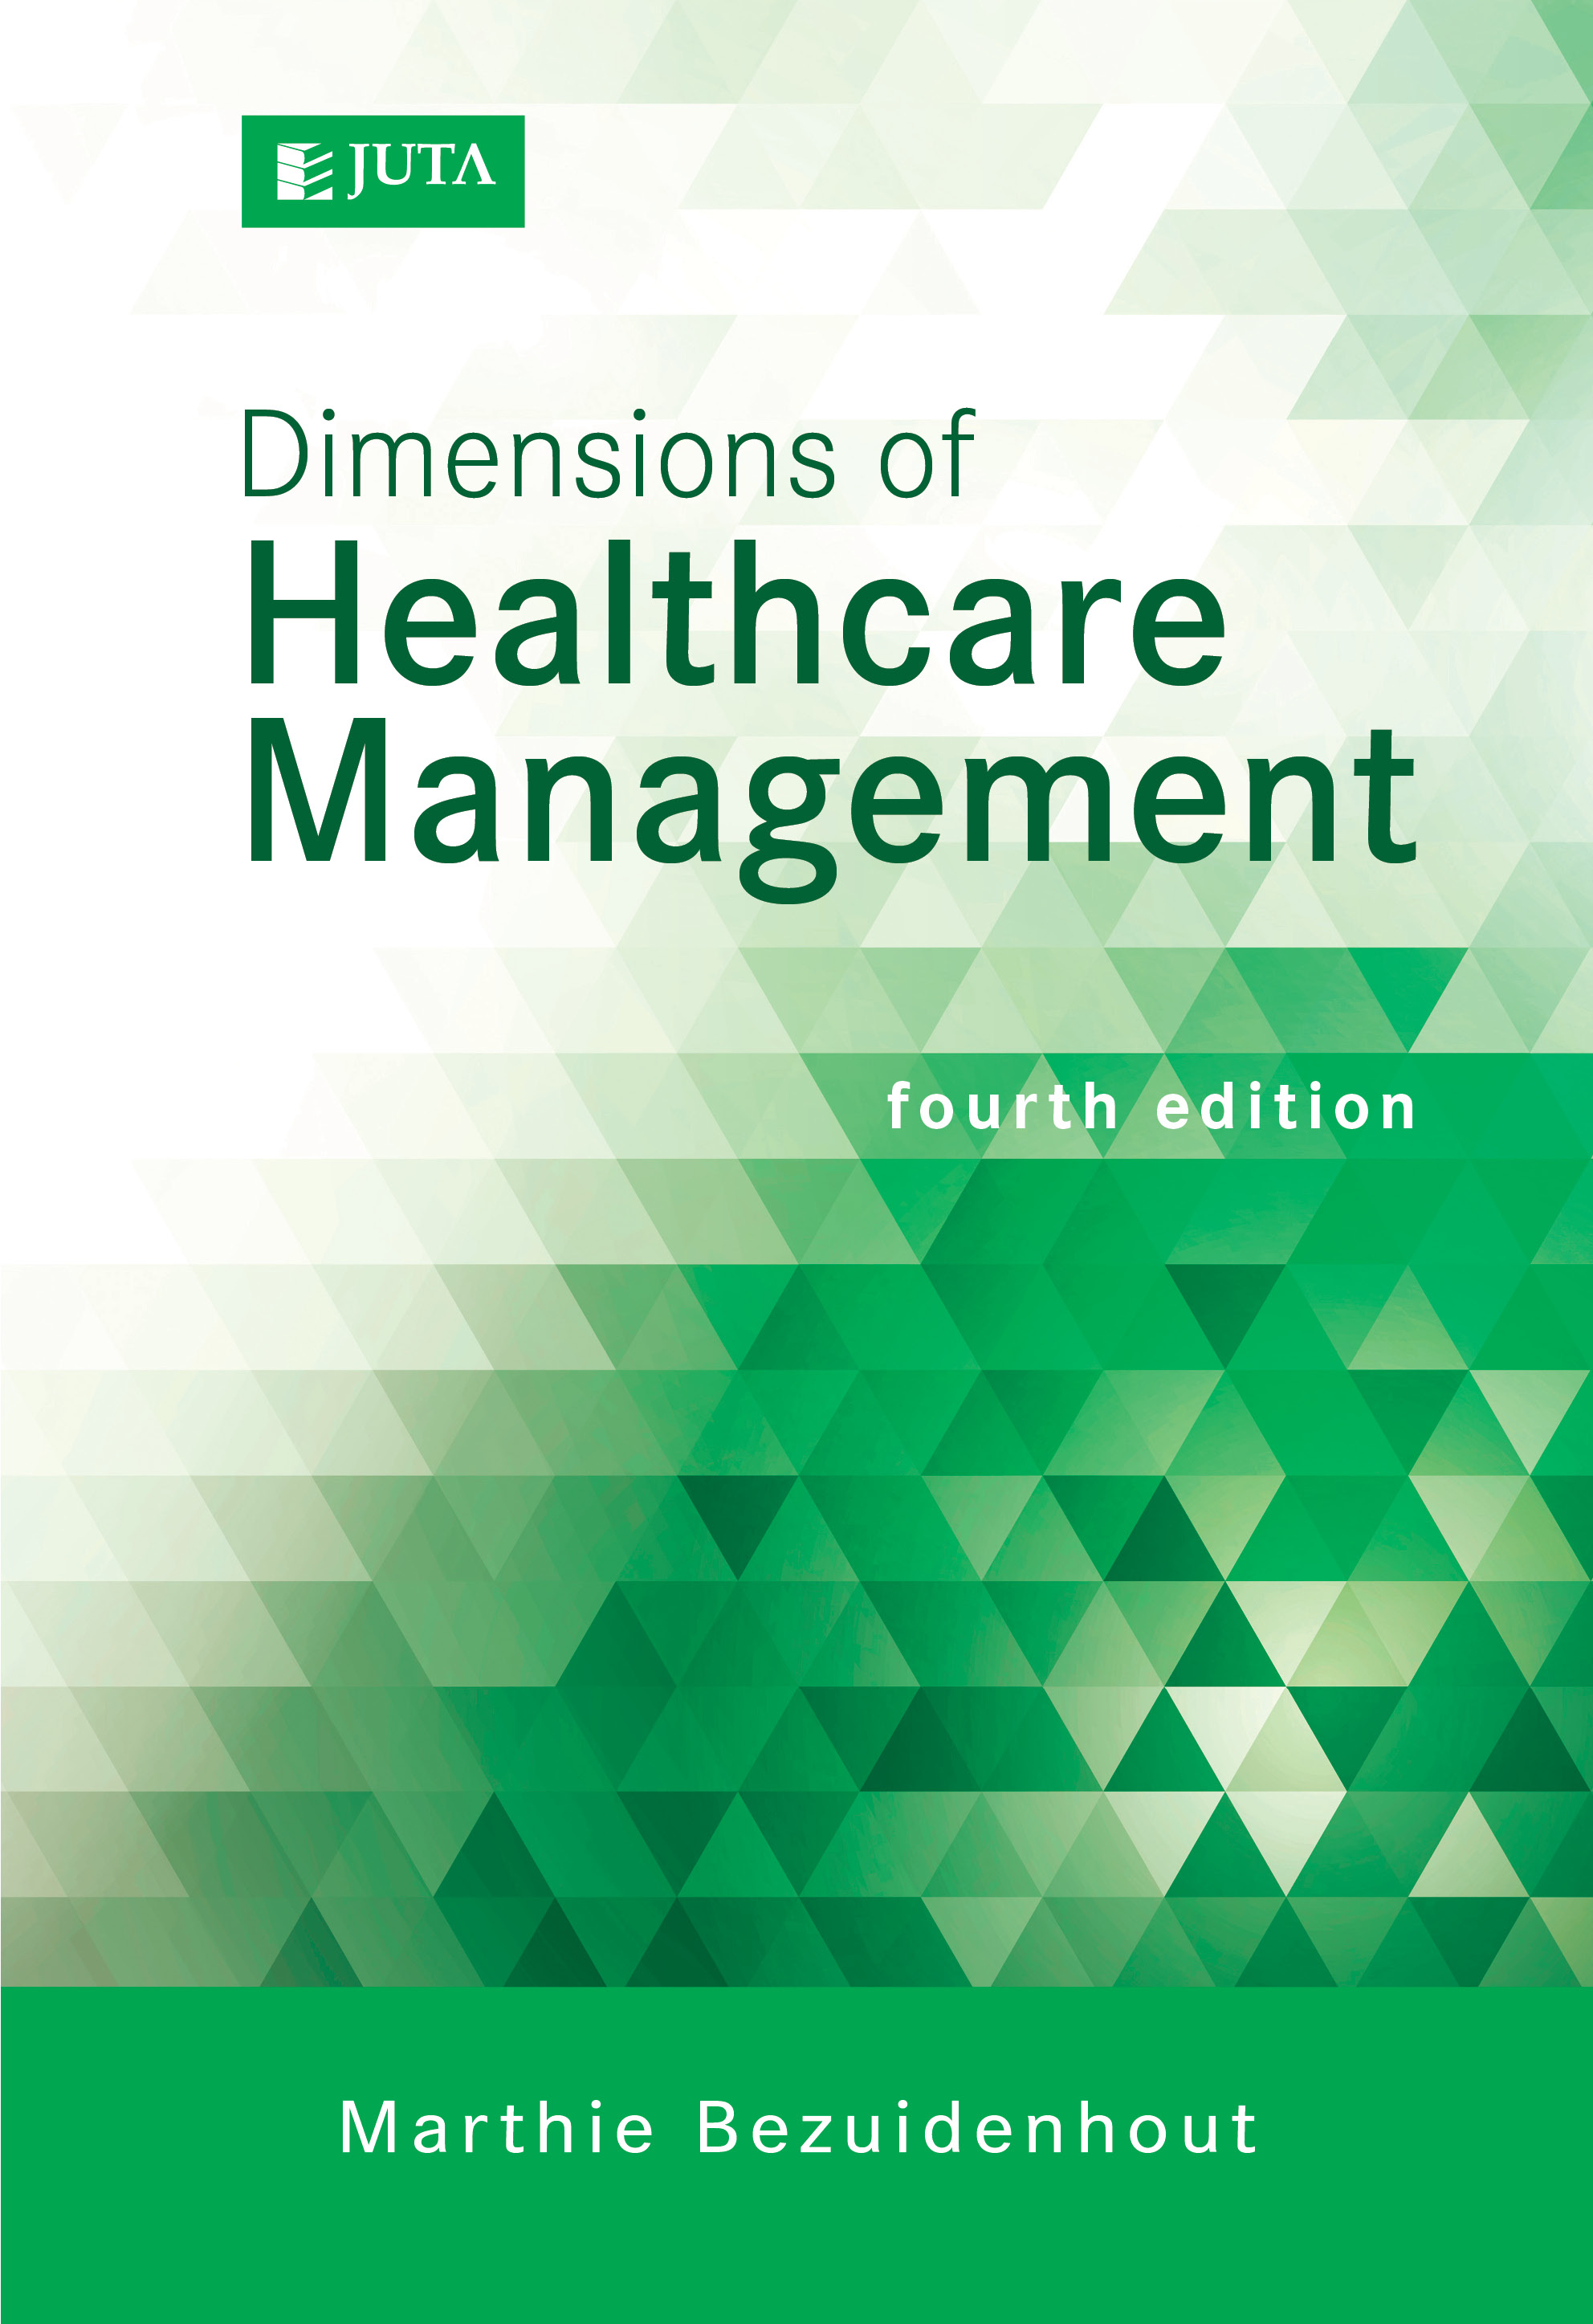 Dimensions of Healthcare Management